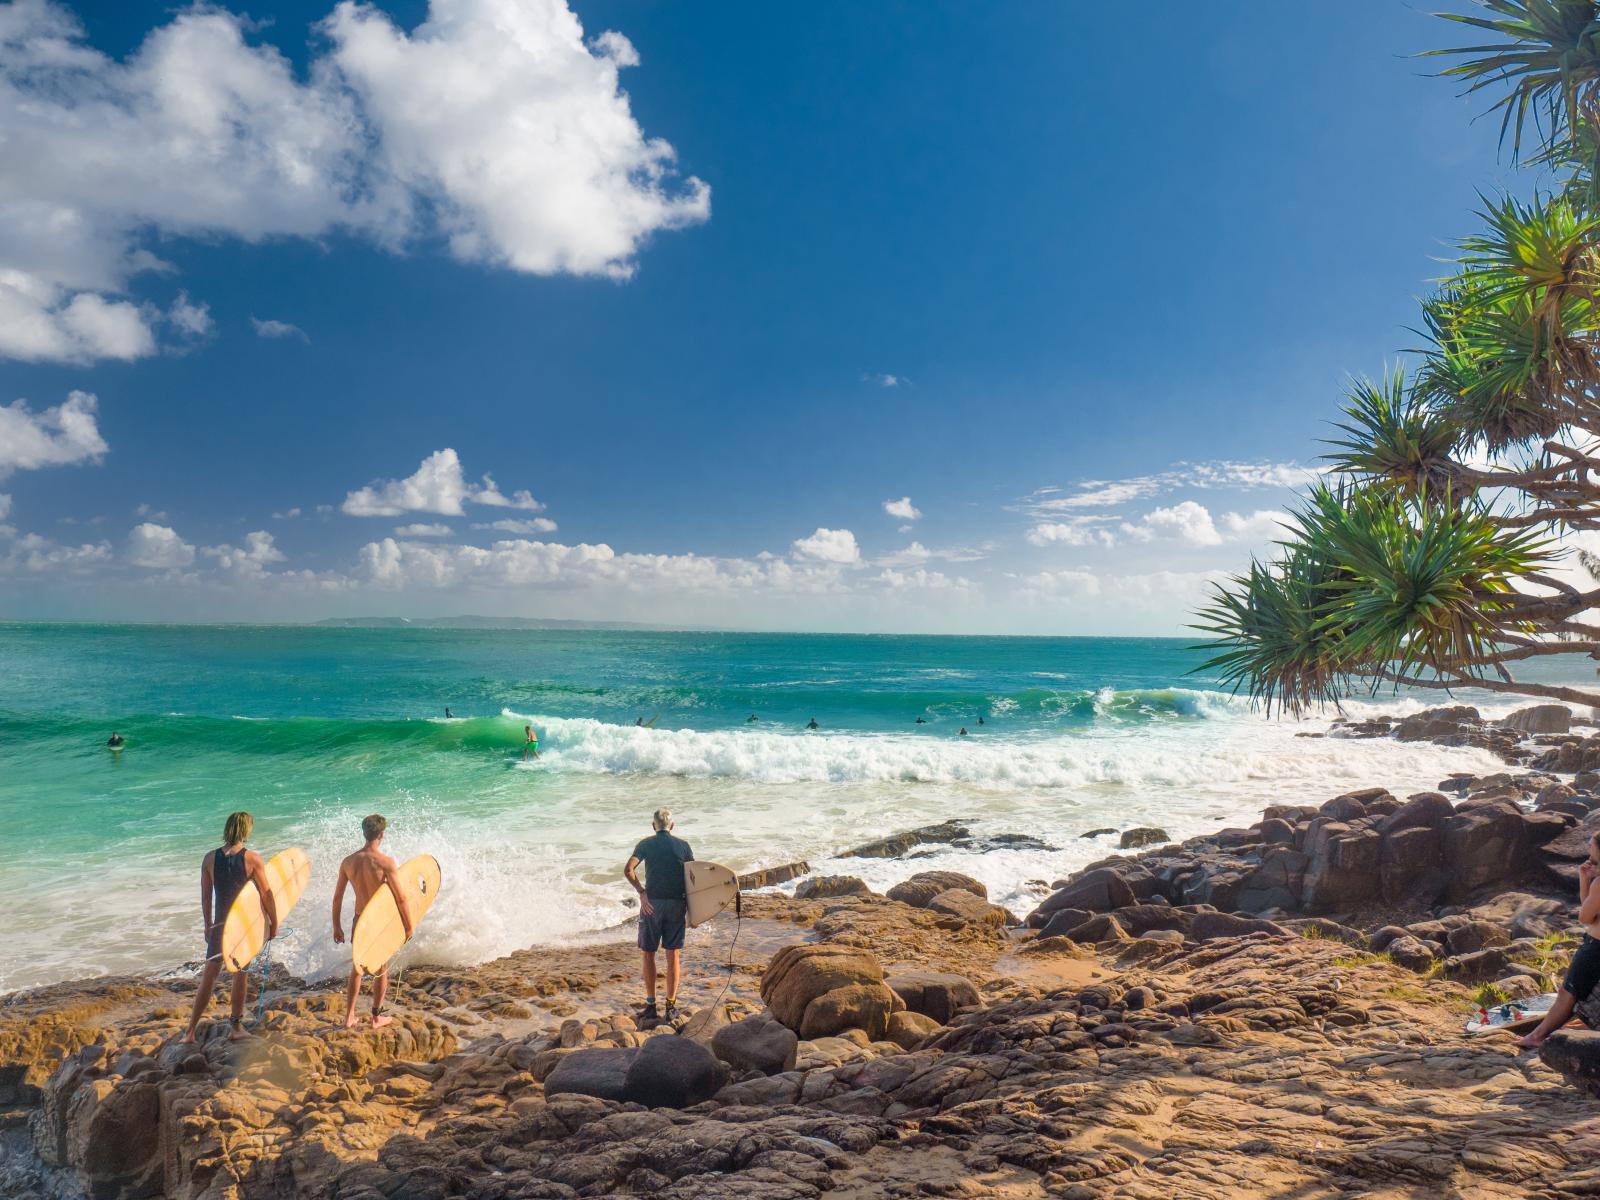 Noosa Heads Surfers - Tourism and Events Queensland